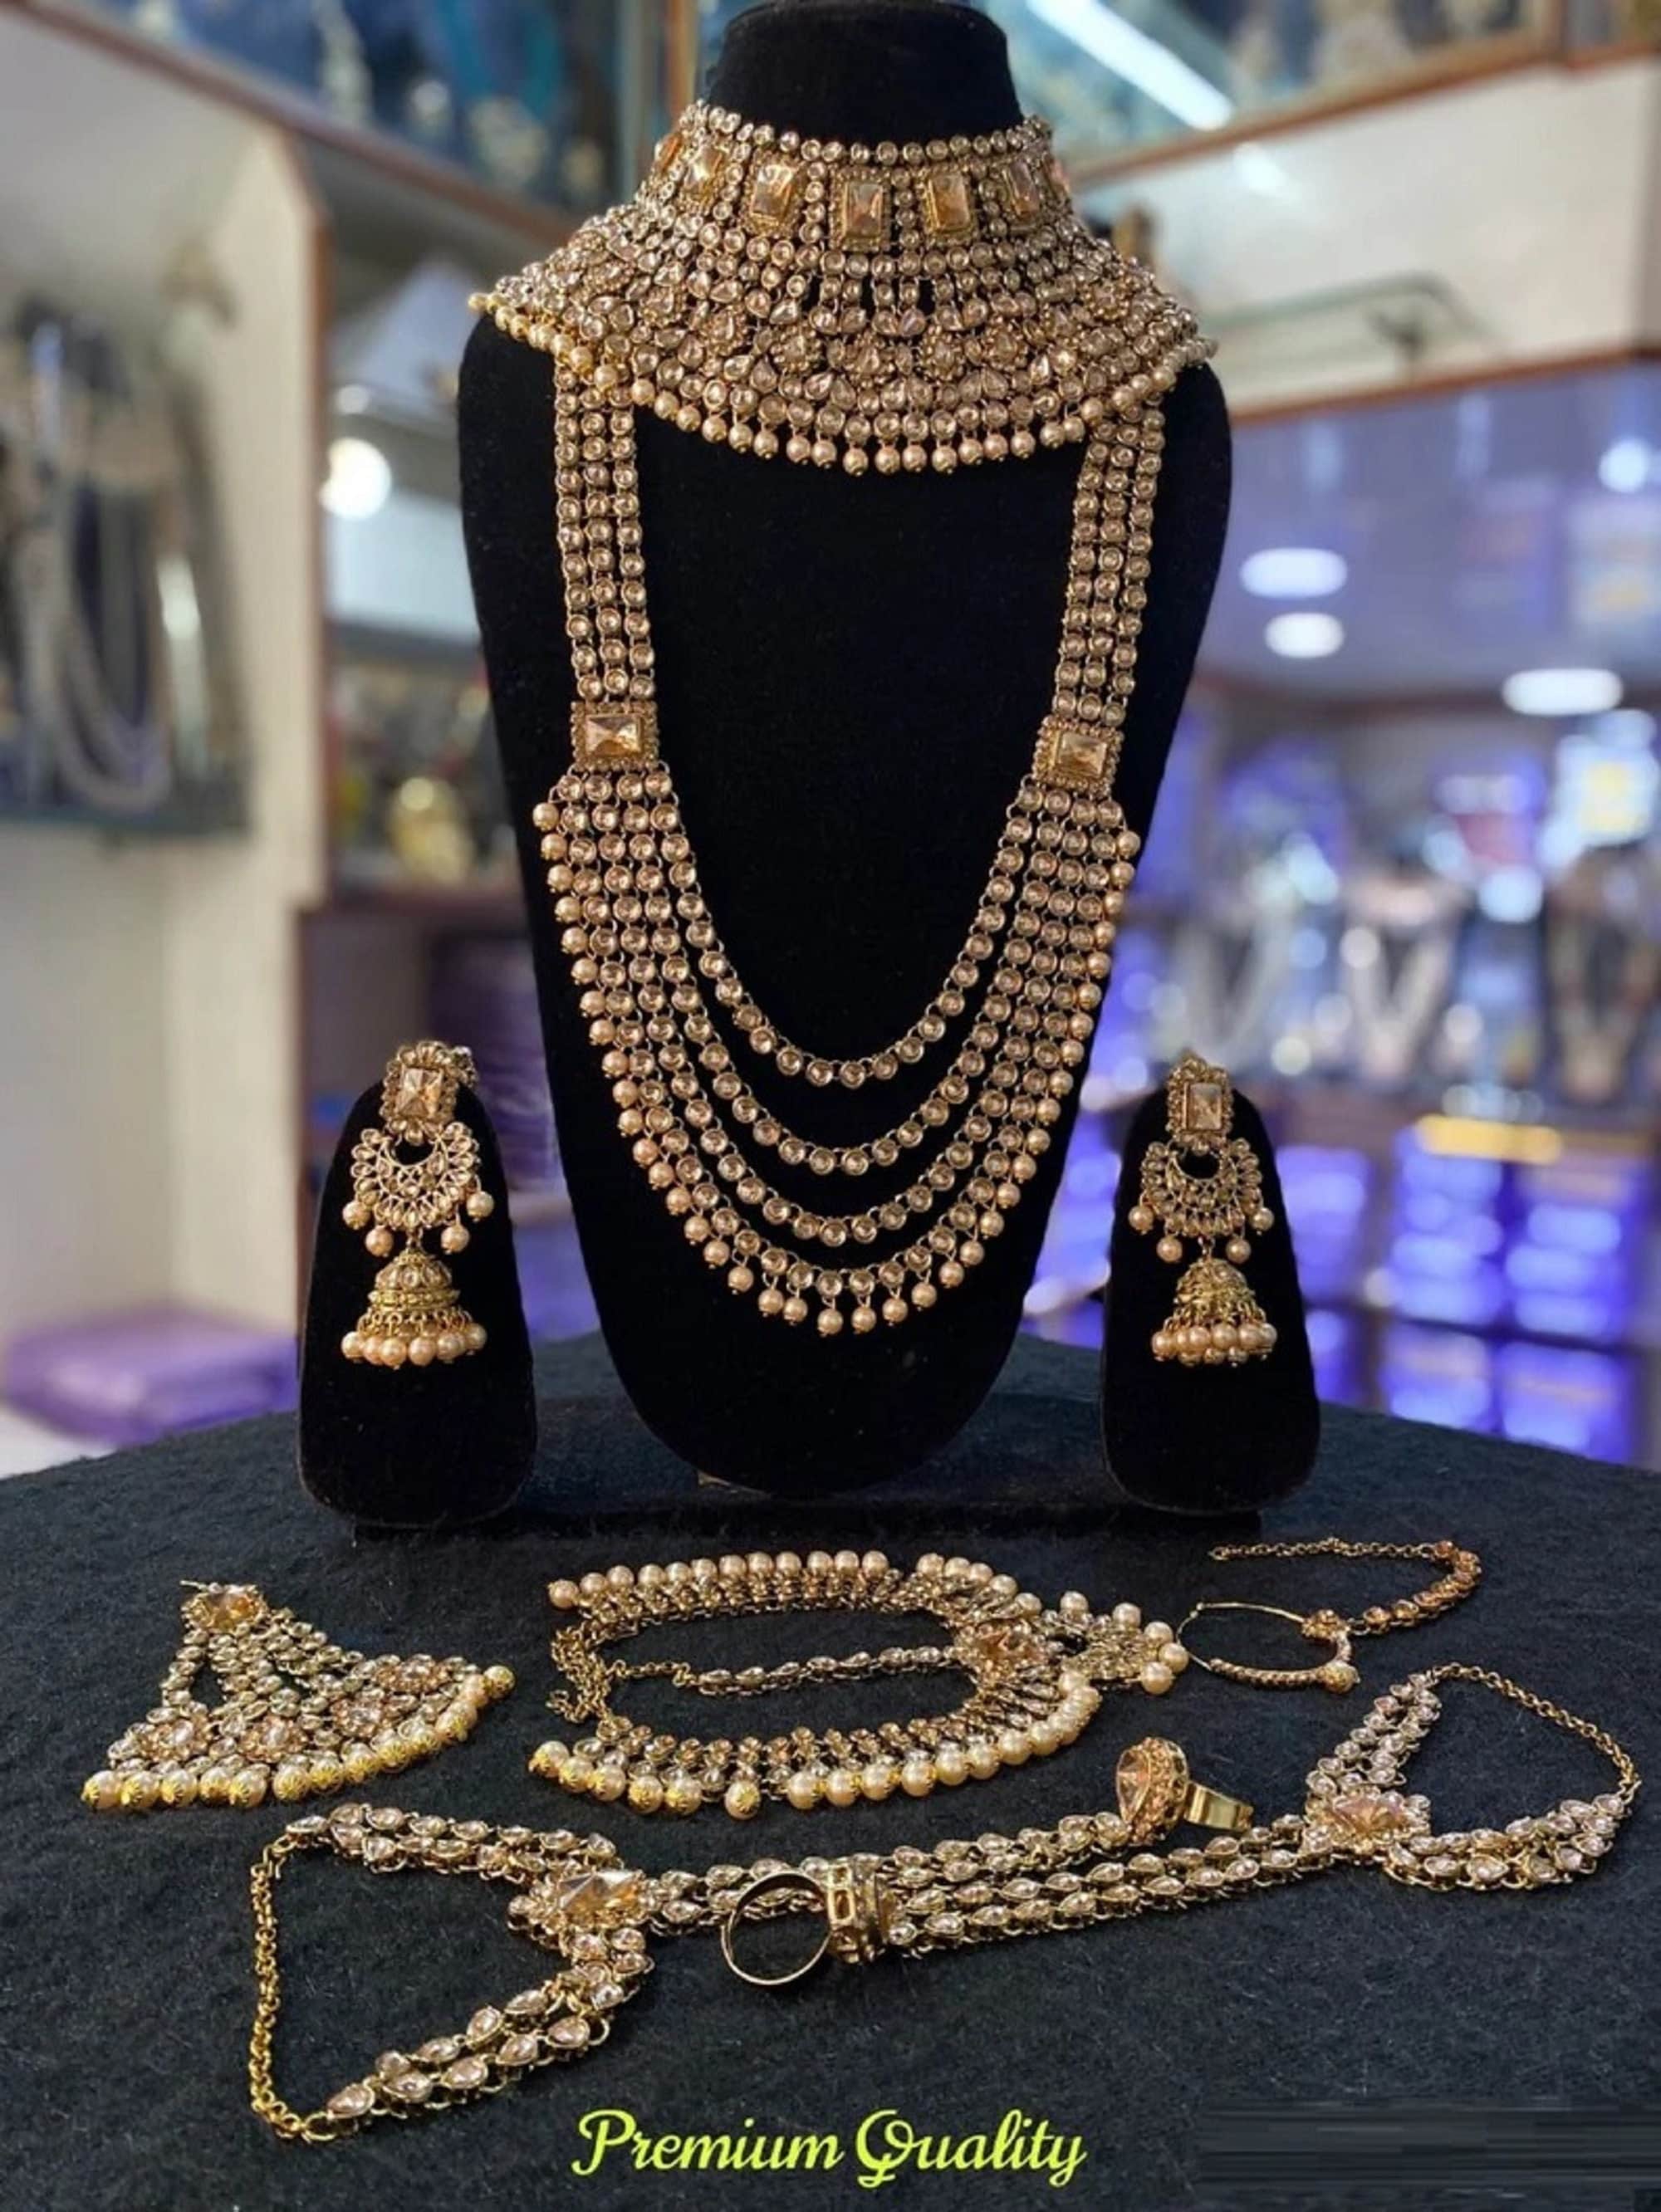 How Do The Designs Of Indian Wedding Jewelry Vary Based On Culture?